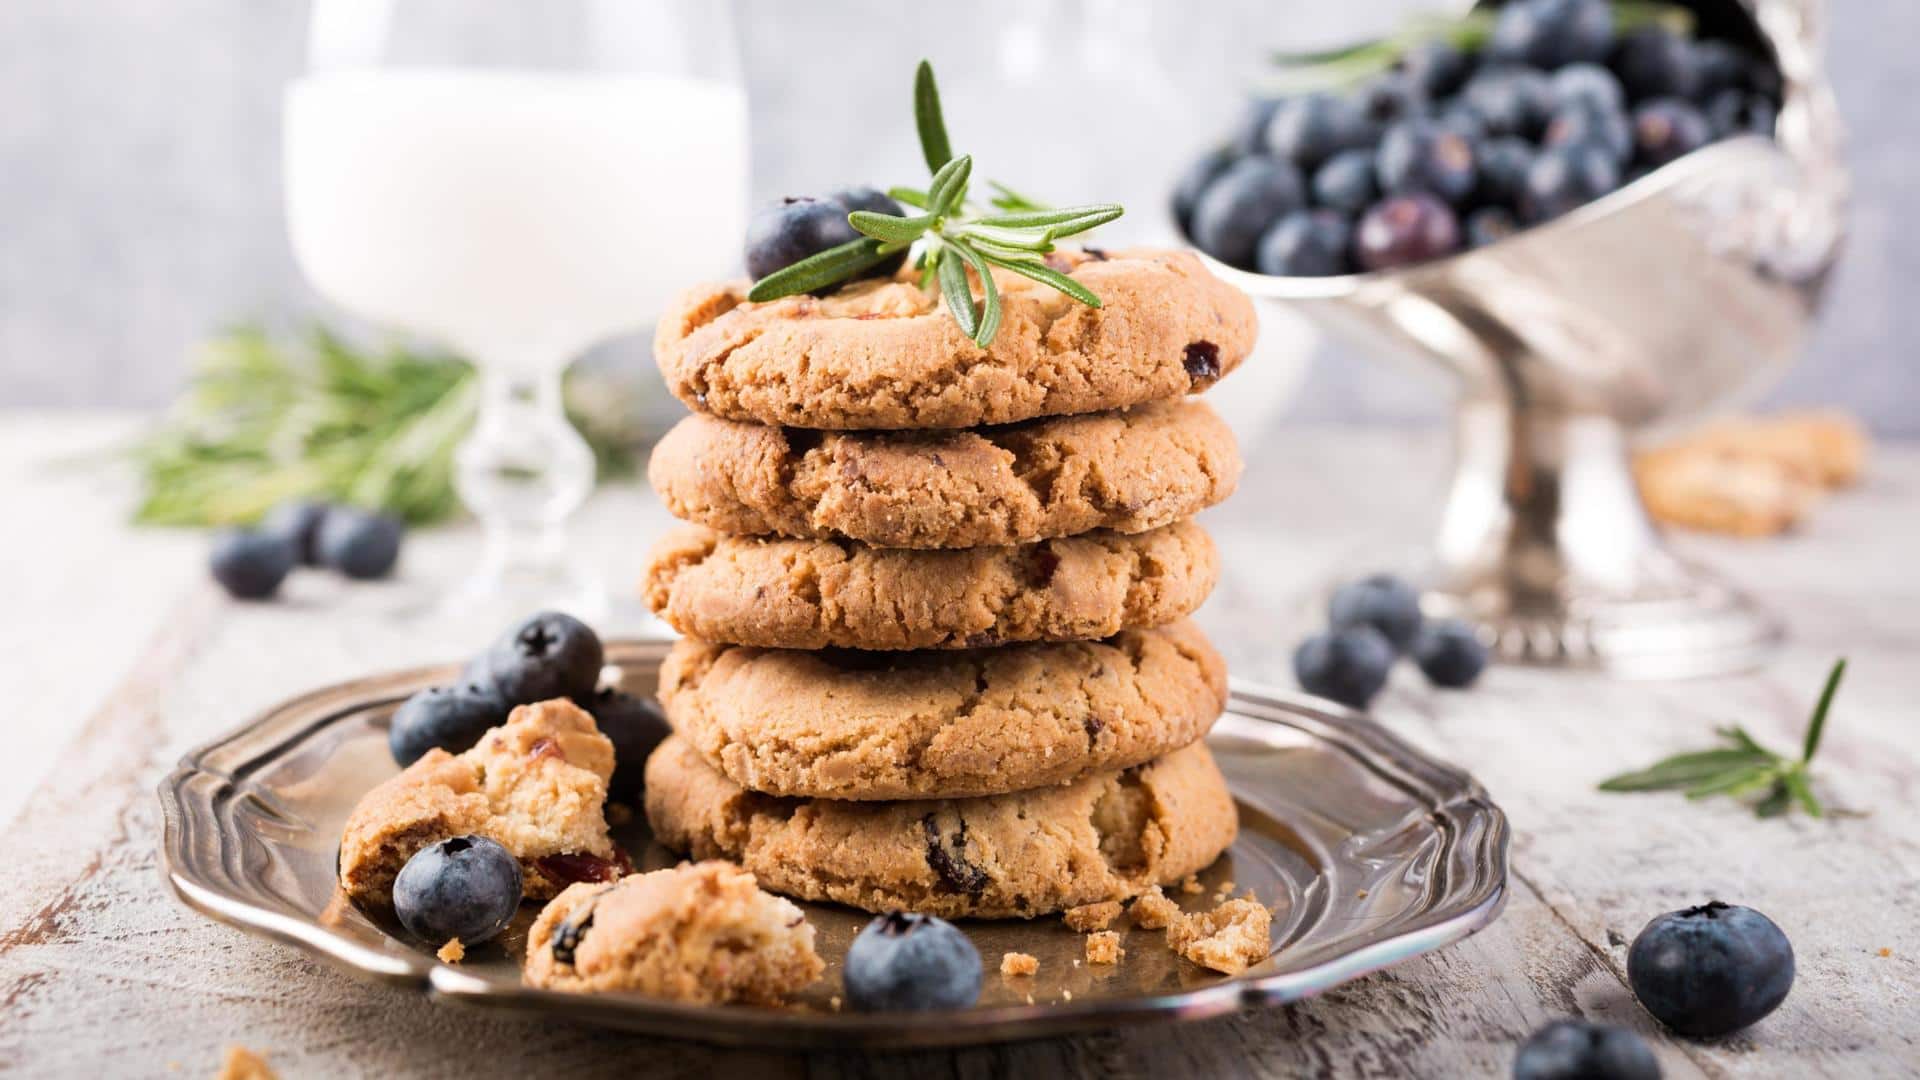 Chocolate Chip Cookie Week: 7 recipes for the 7 days